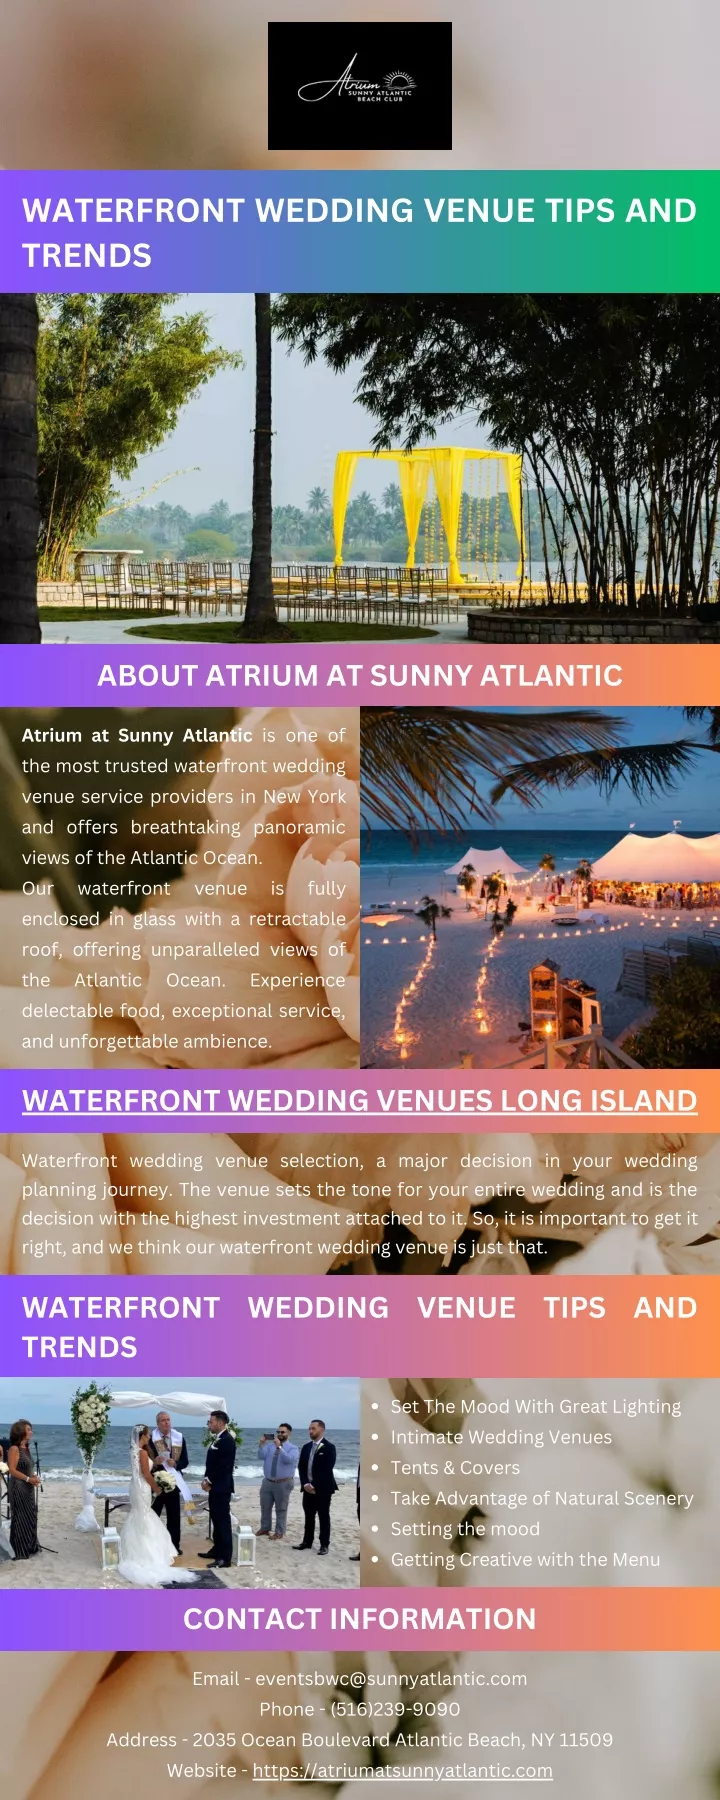 waterfront wedding venue tips and trends